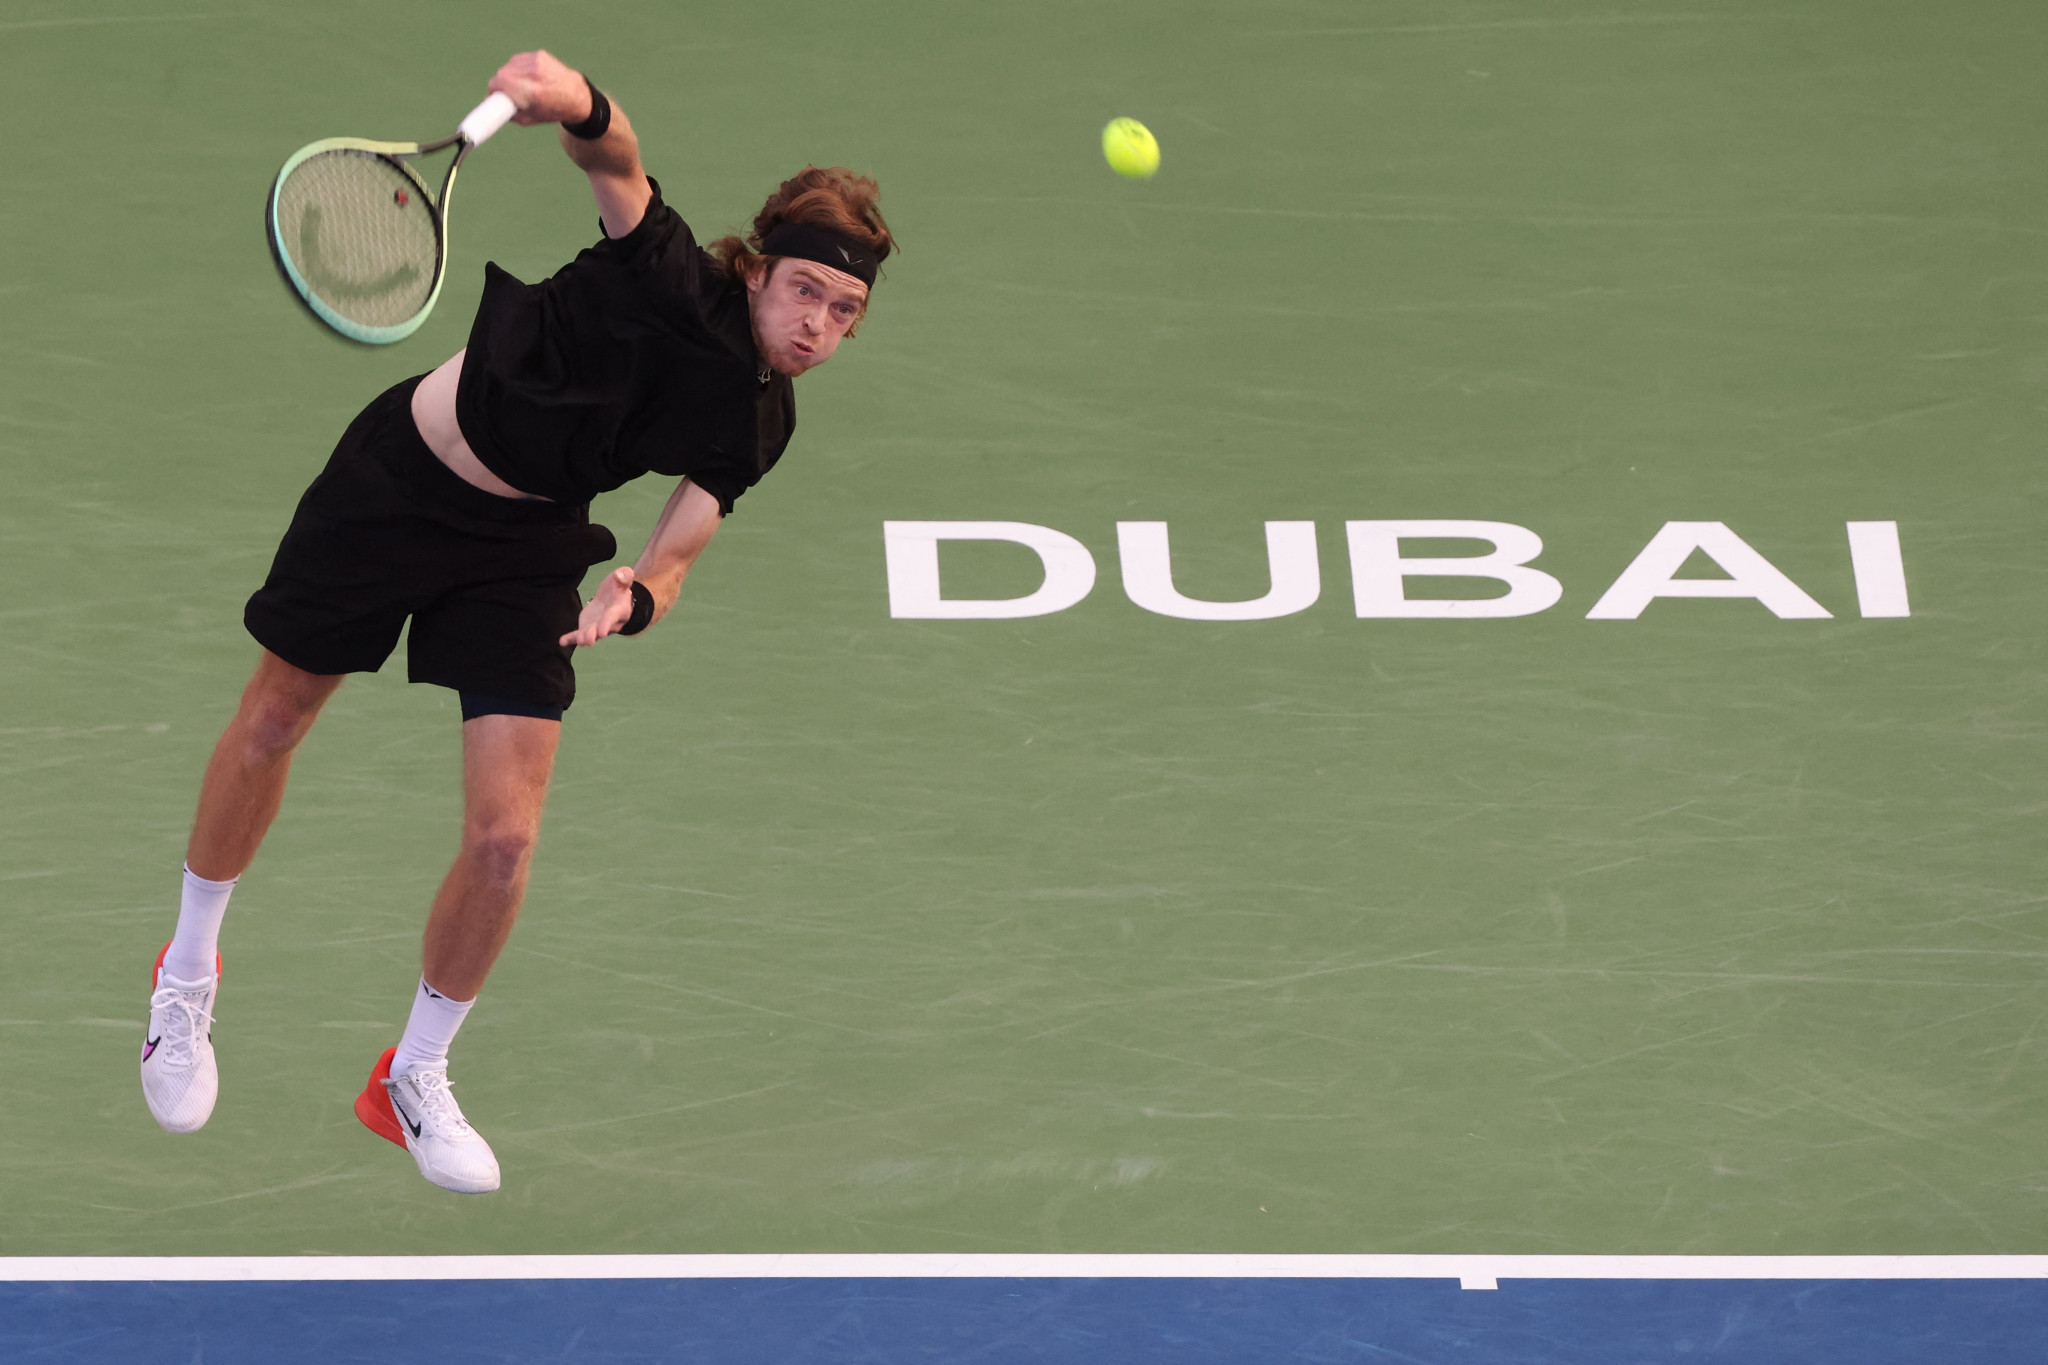 Russian player Andrey Rublev said it is "crazy that so many just normal citizens are suffering" ©Getty Images